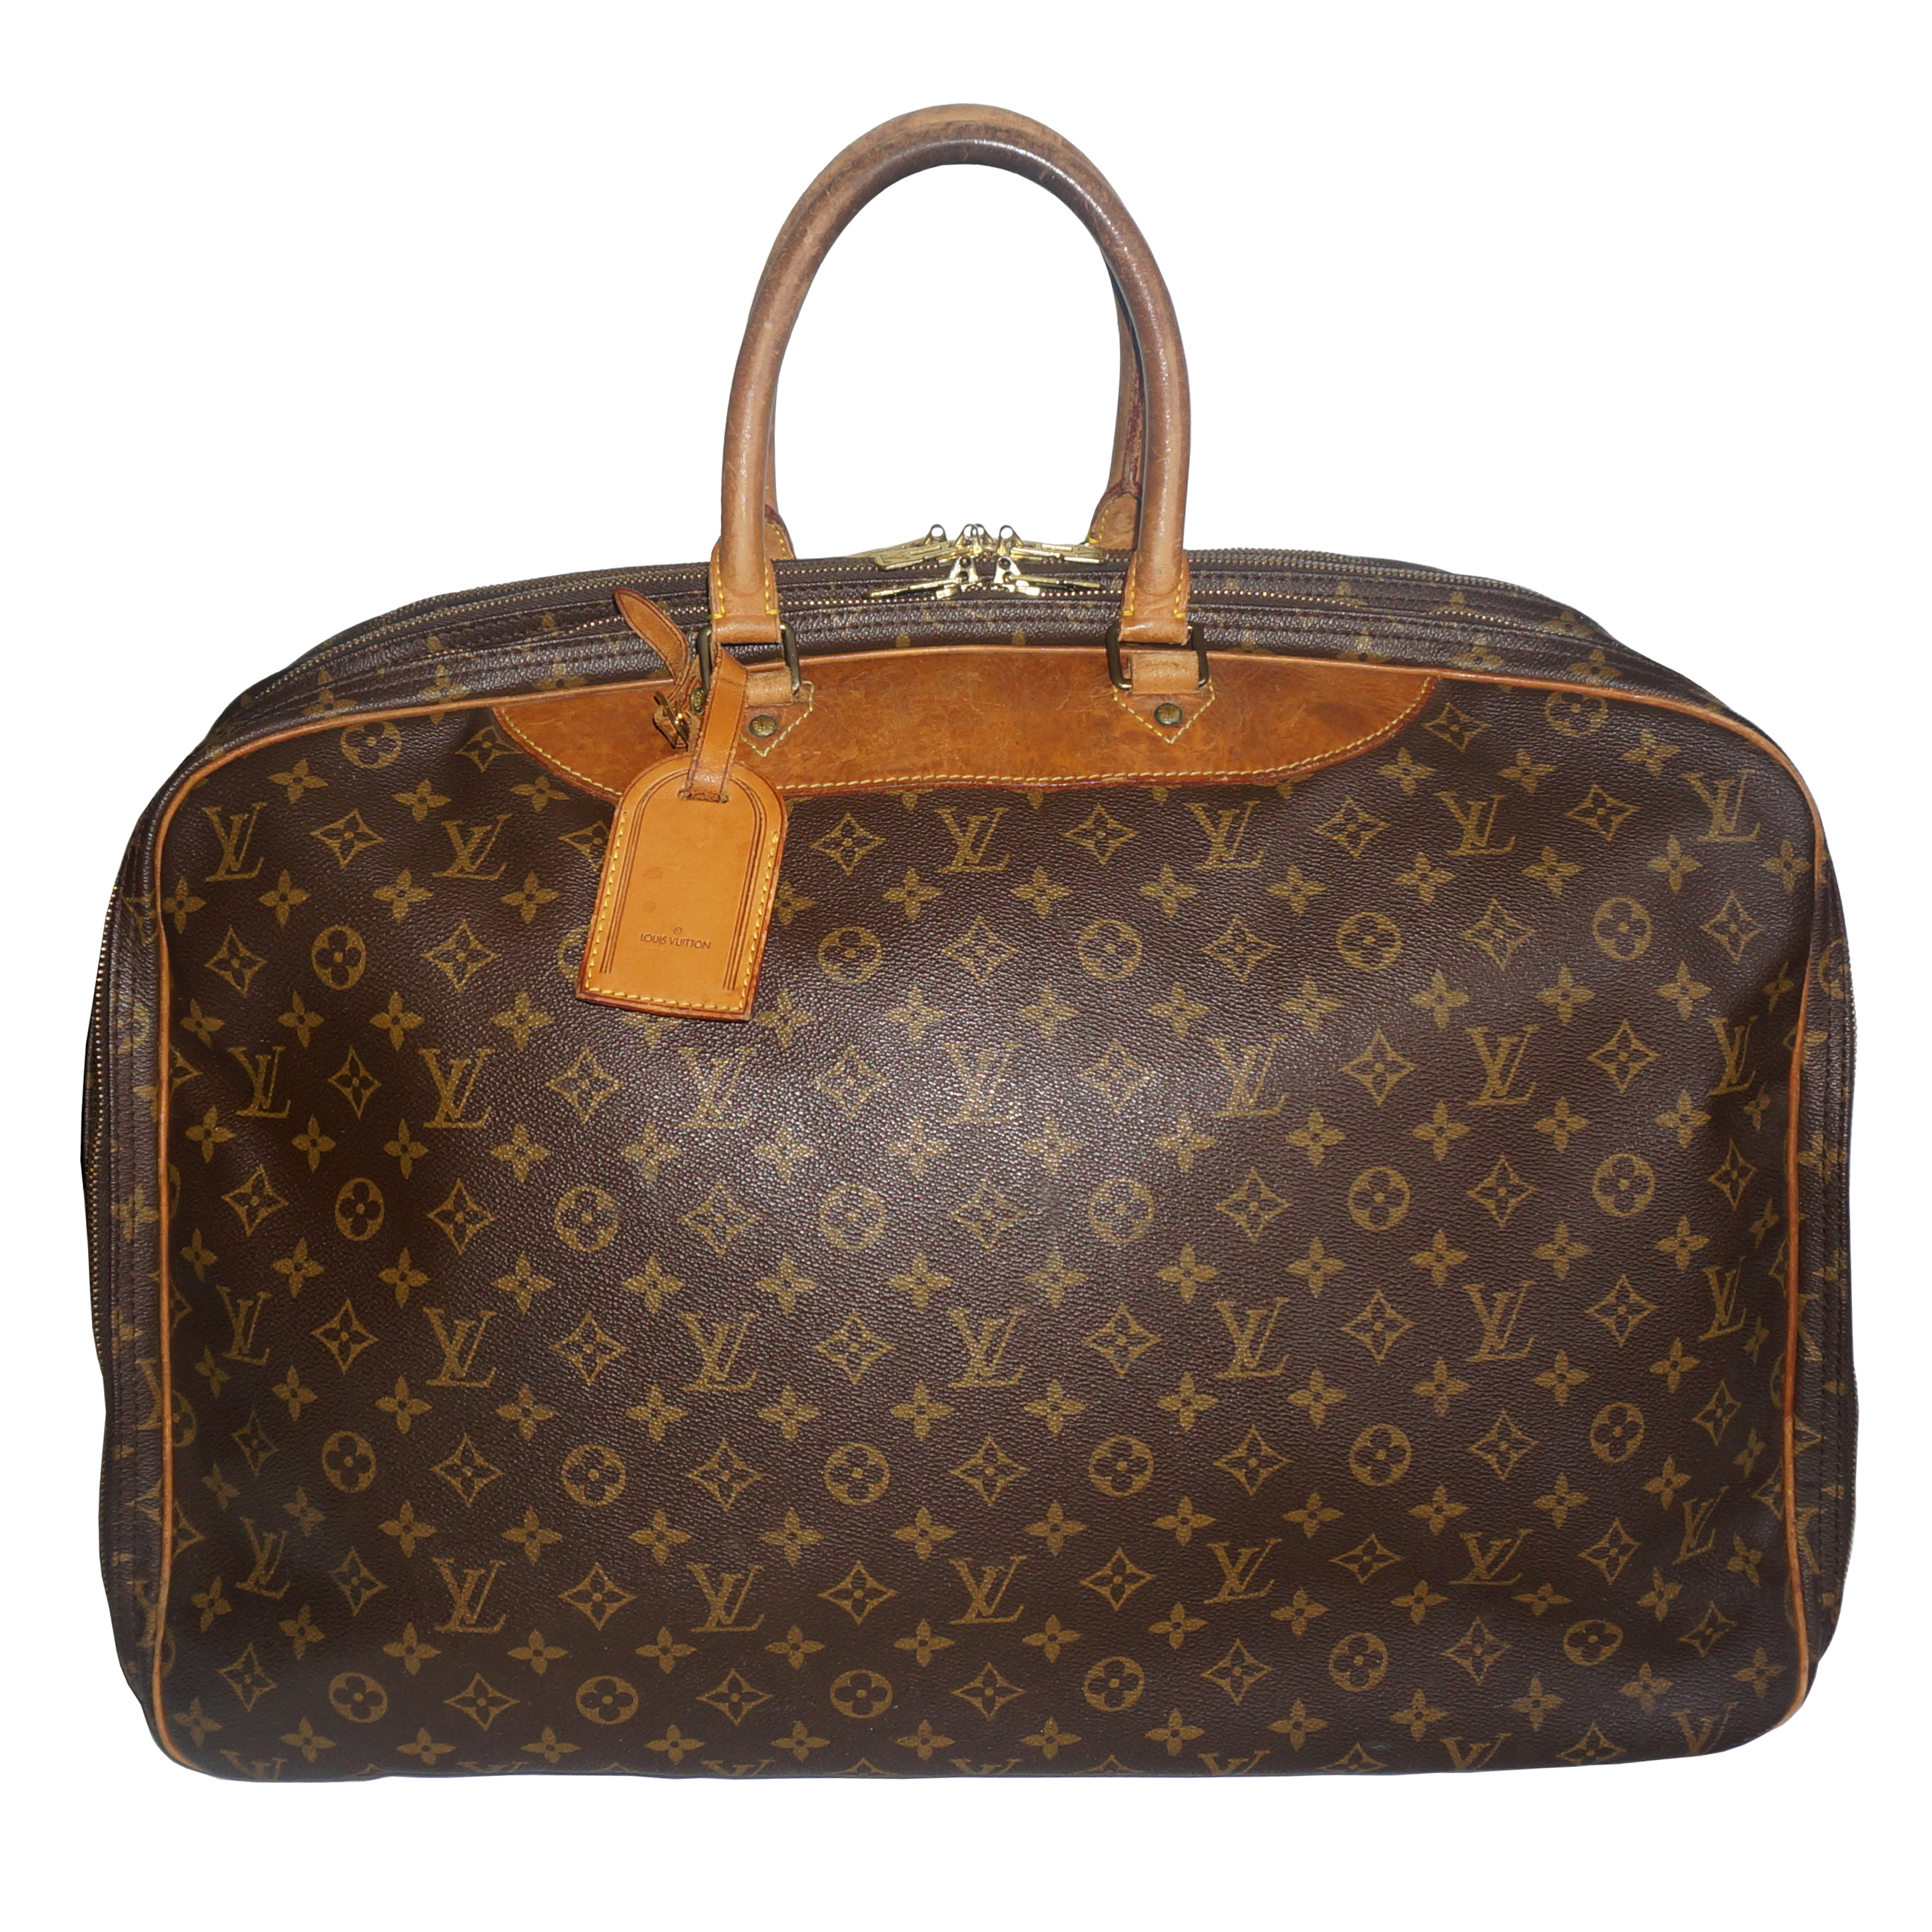 Rare, Louis Vuitton Weekender Bag with Iconic LV Monogram and Leather ...